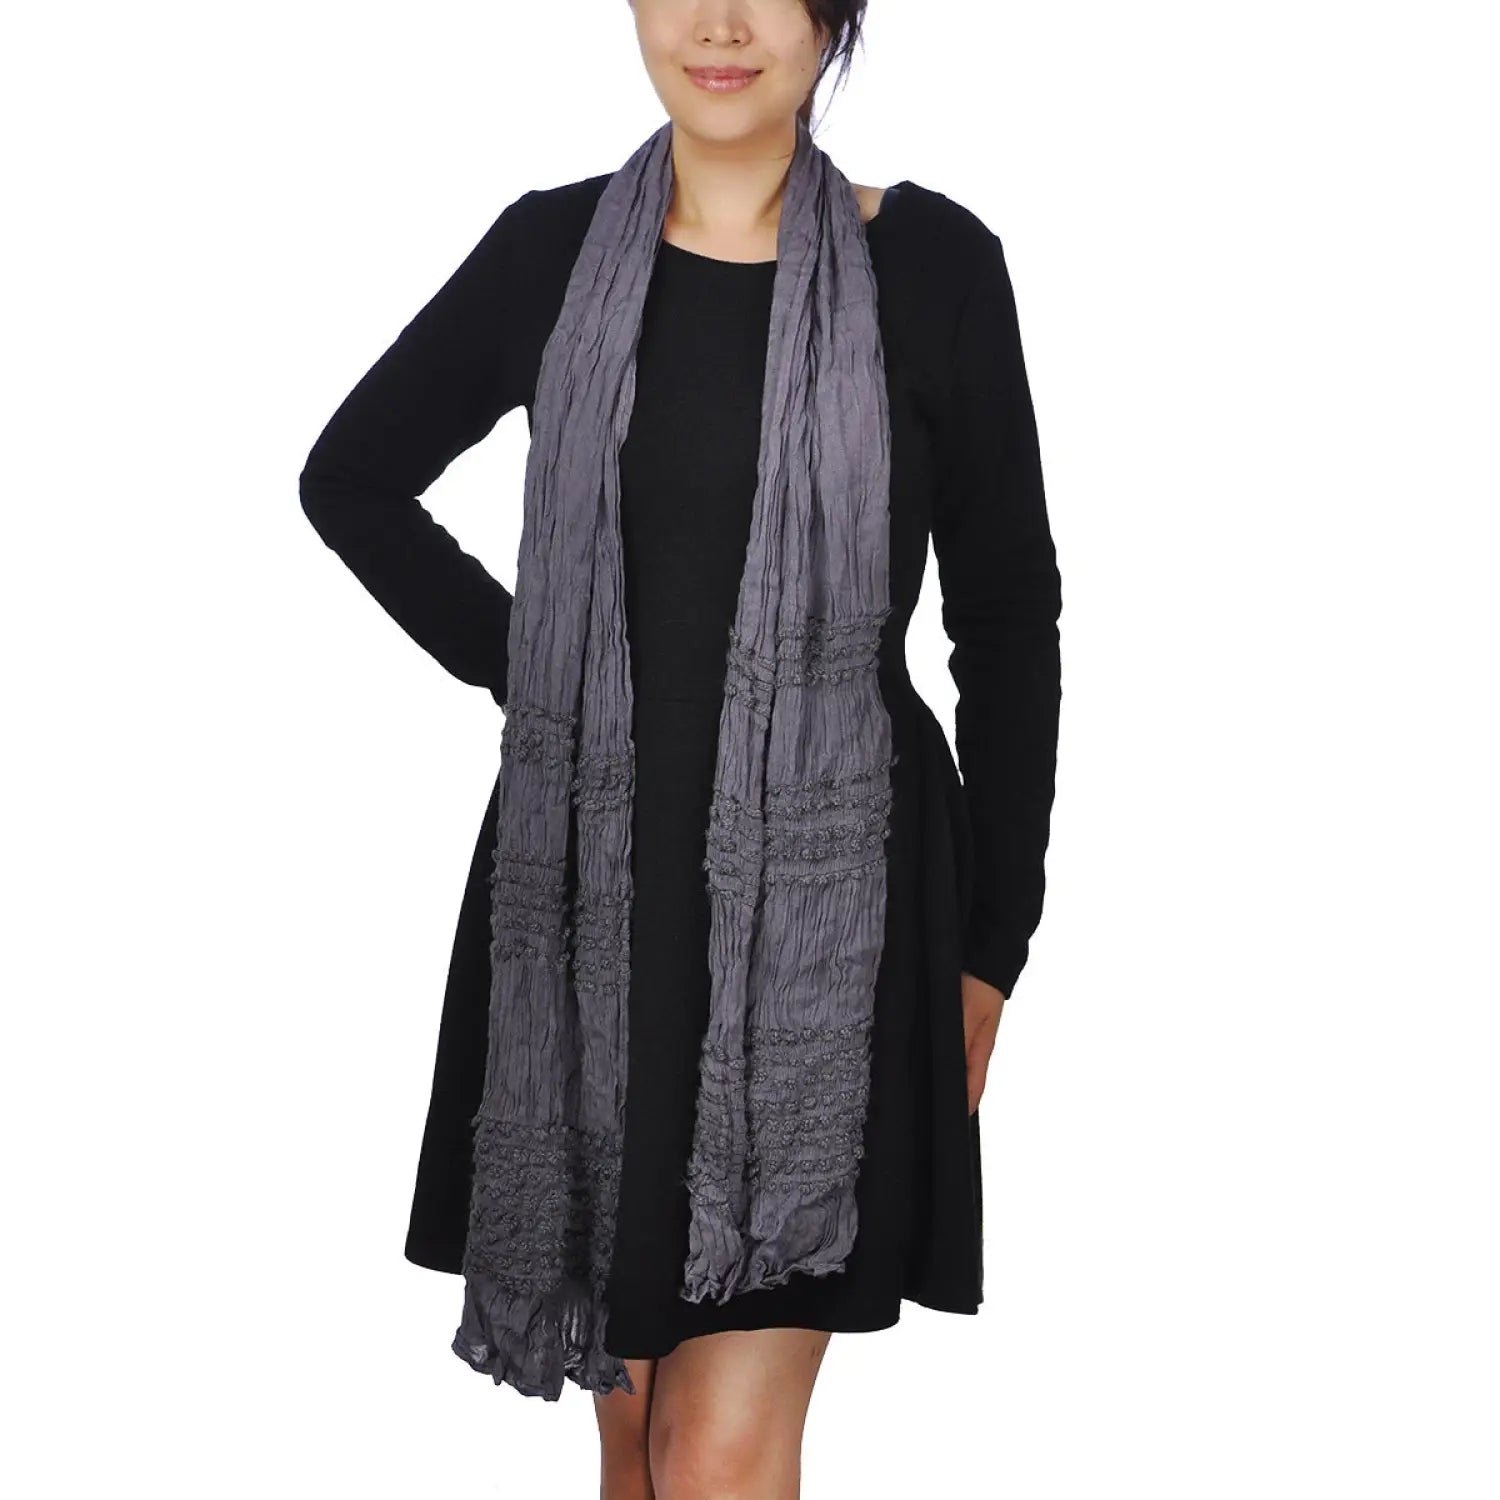 Crinkled embroidered warm scarf with black and grey design.